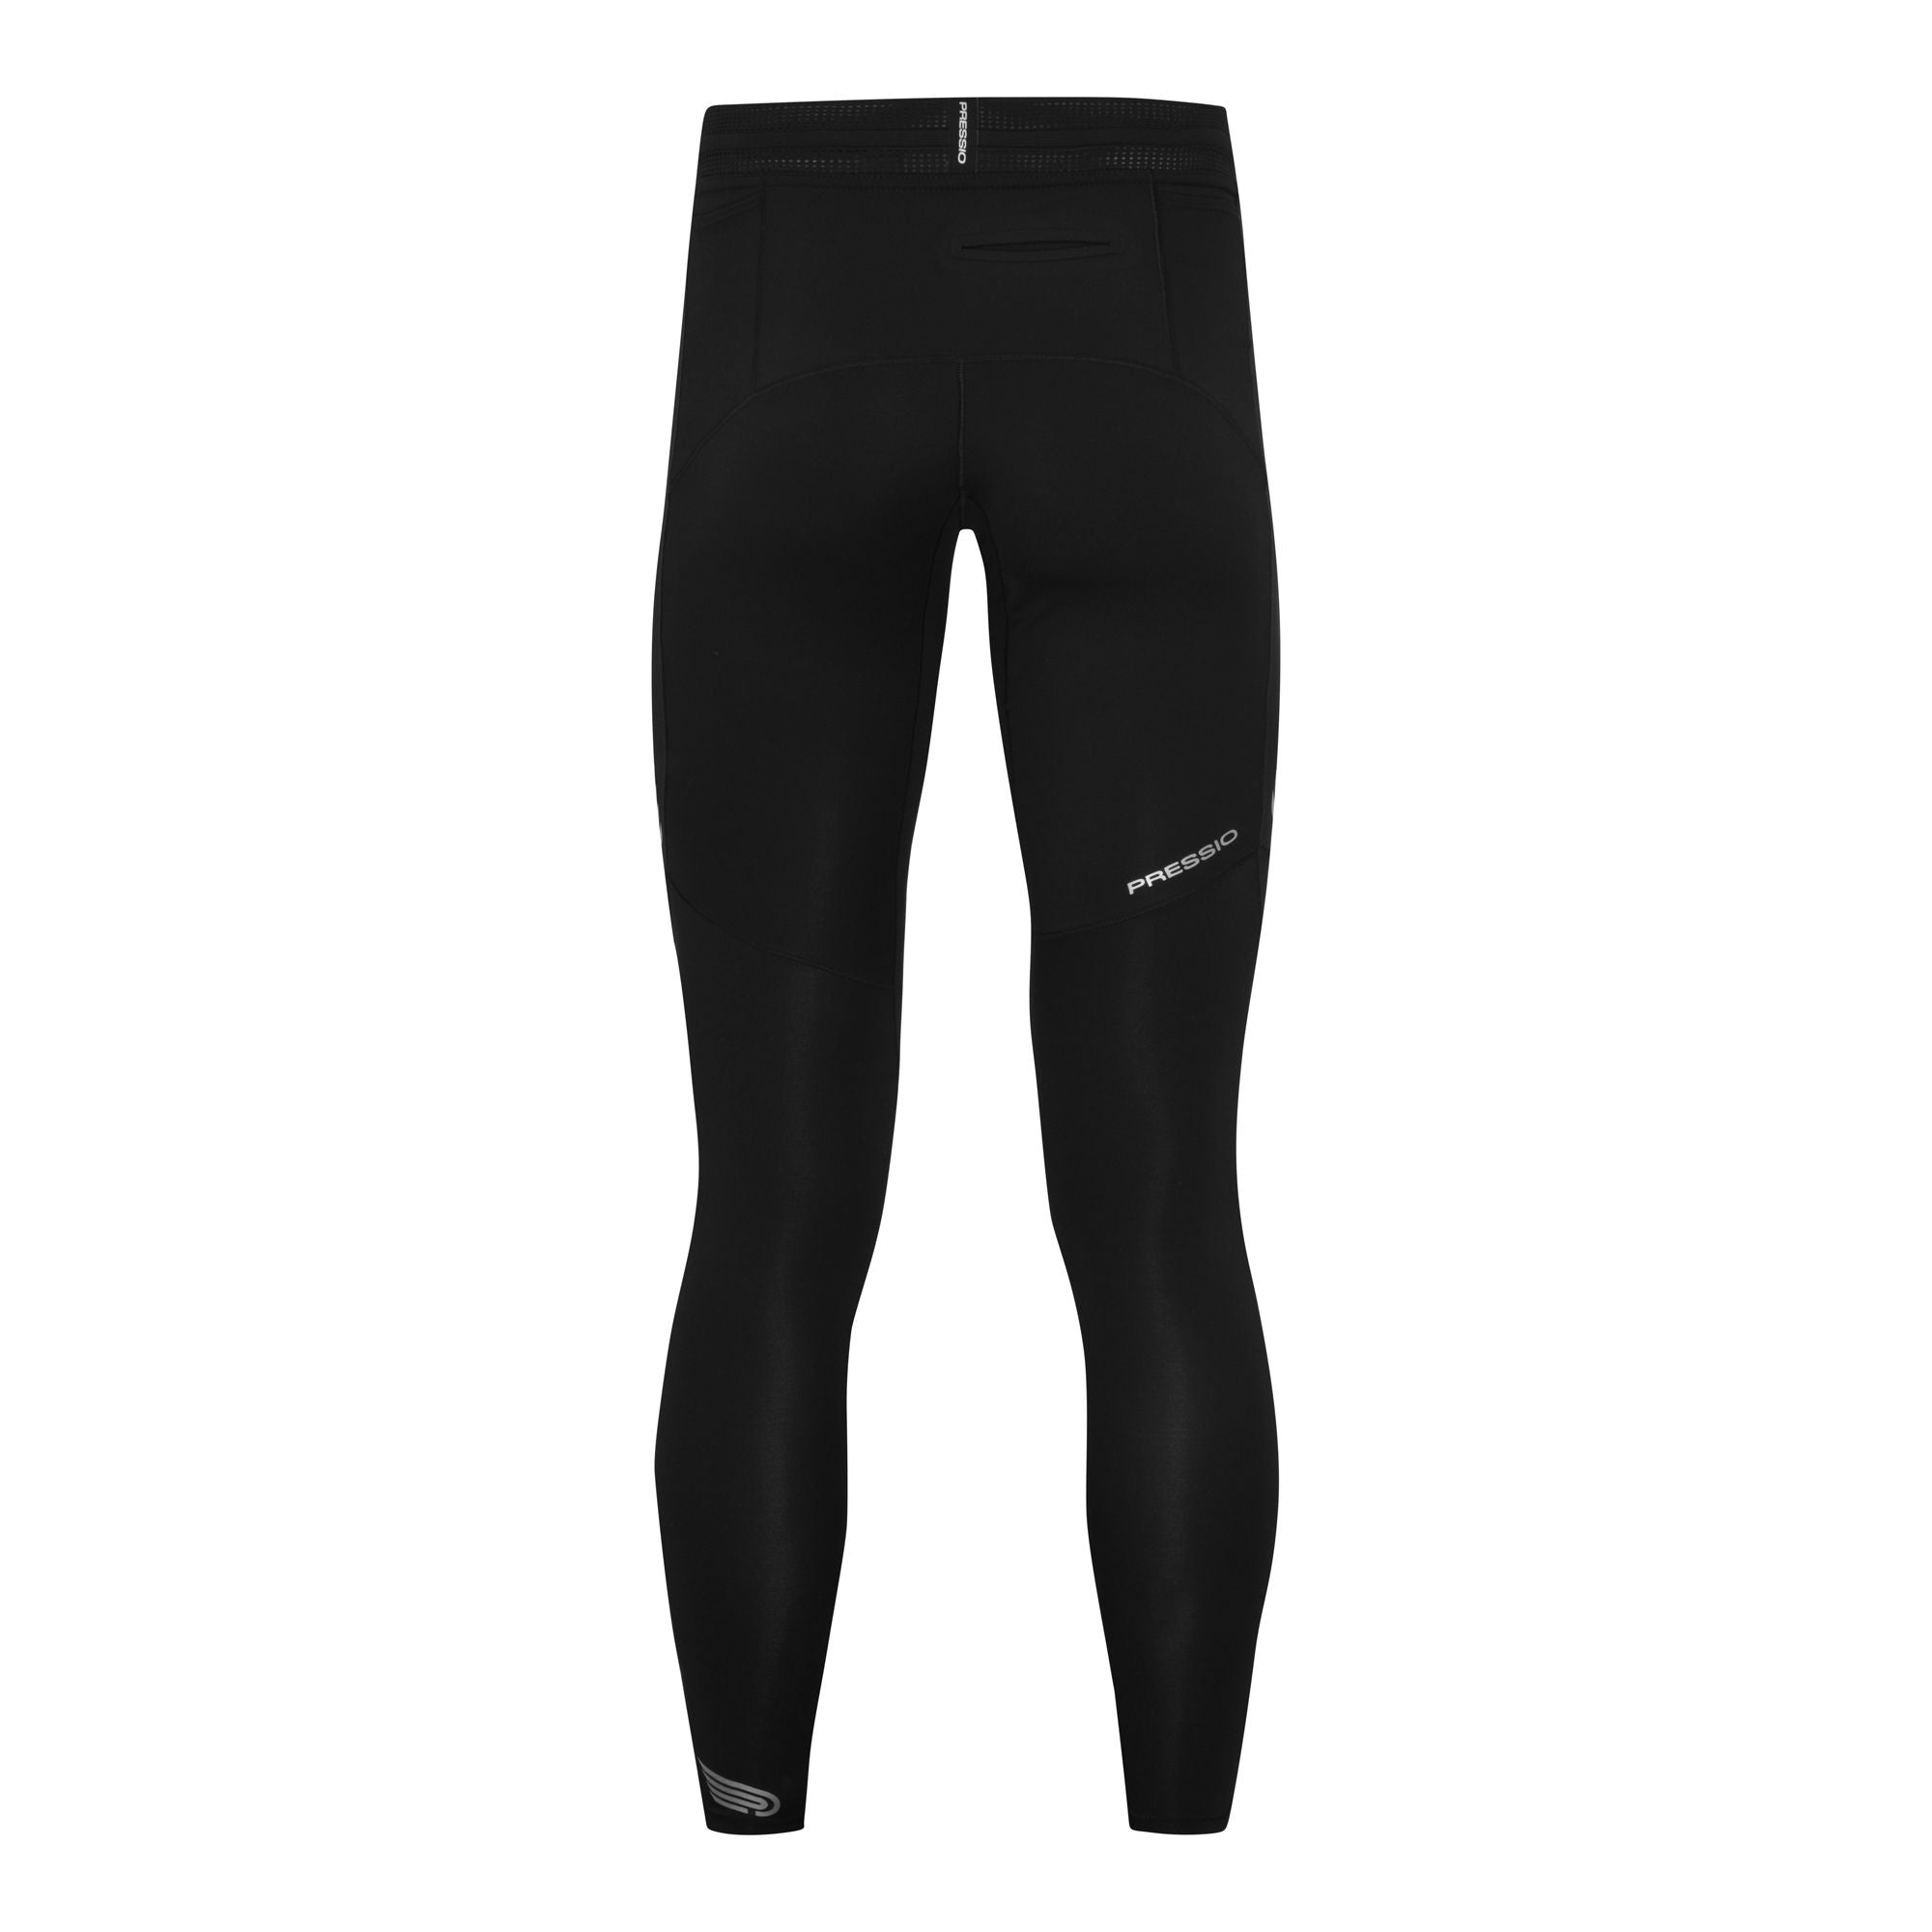 Buy 3 Pack Men Compression Tights Running Leggings Gym Fitness Jogging  Pants Pocket Workout Training Sport Trousers at Amazon.in